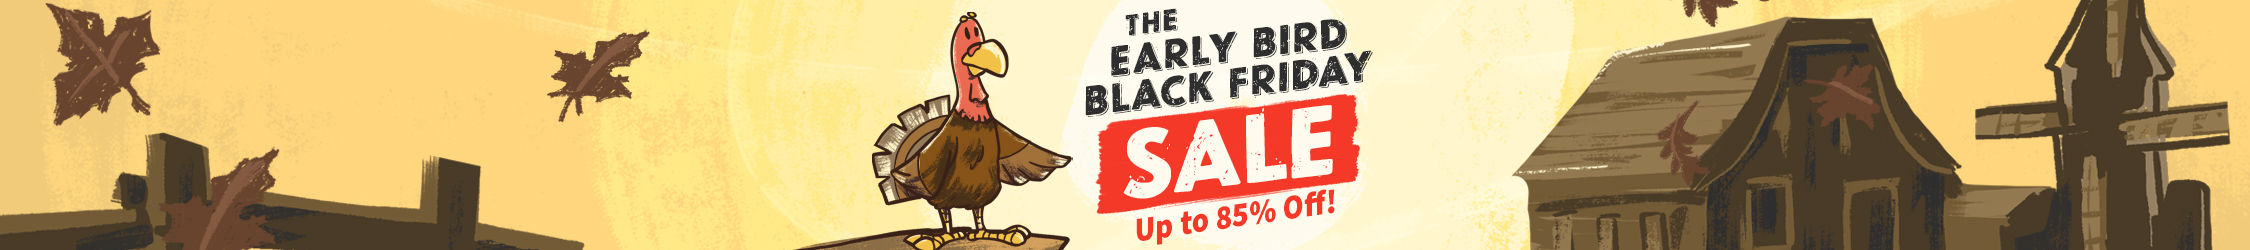 Early Bird Sale save Up to 85% Off!